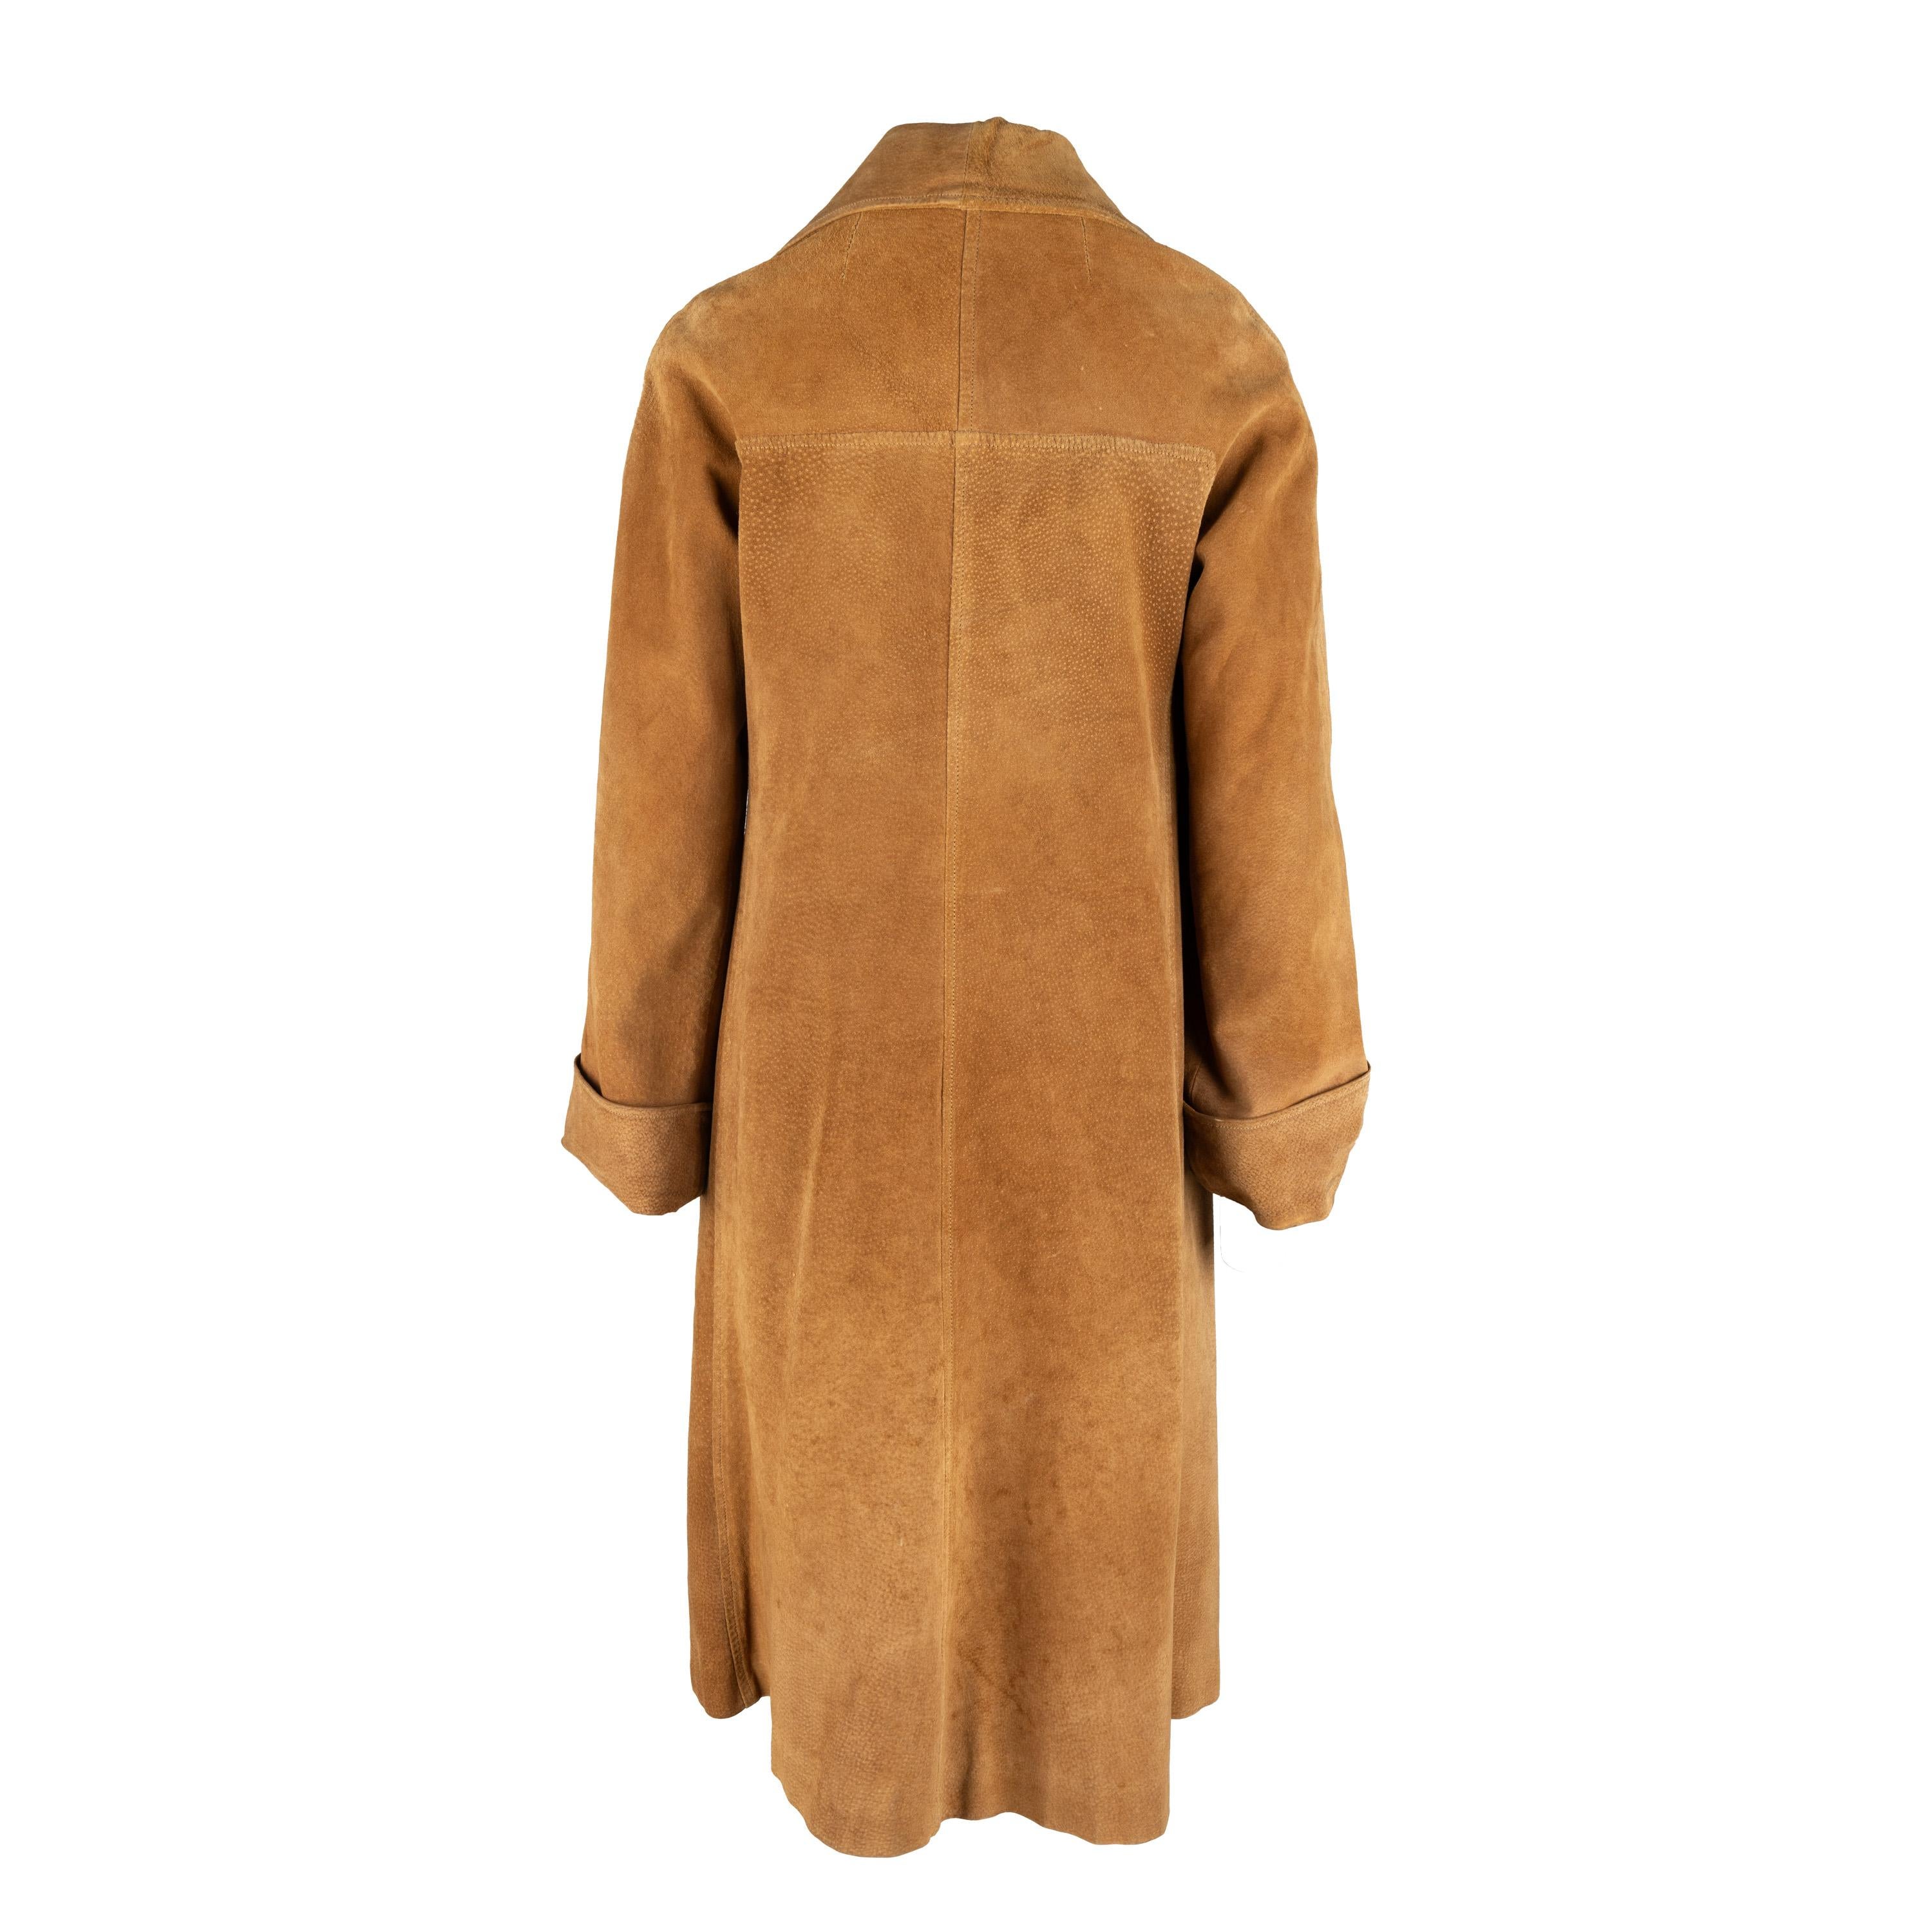 This Gucci Vintage Suede Long Jacket is crafted from suede leather in burnt orange hue.  With a long flowy silhouette and a winged collar, this jacket is the perfect throwback to the 90s, complete with two side pockets and folded sleeve